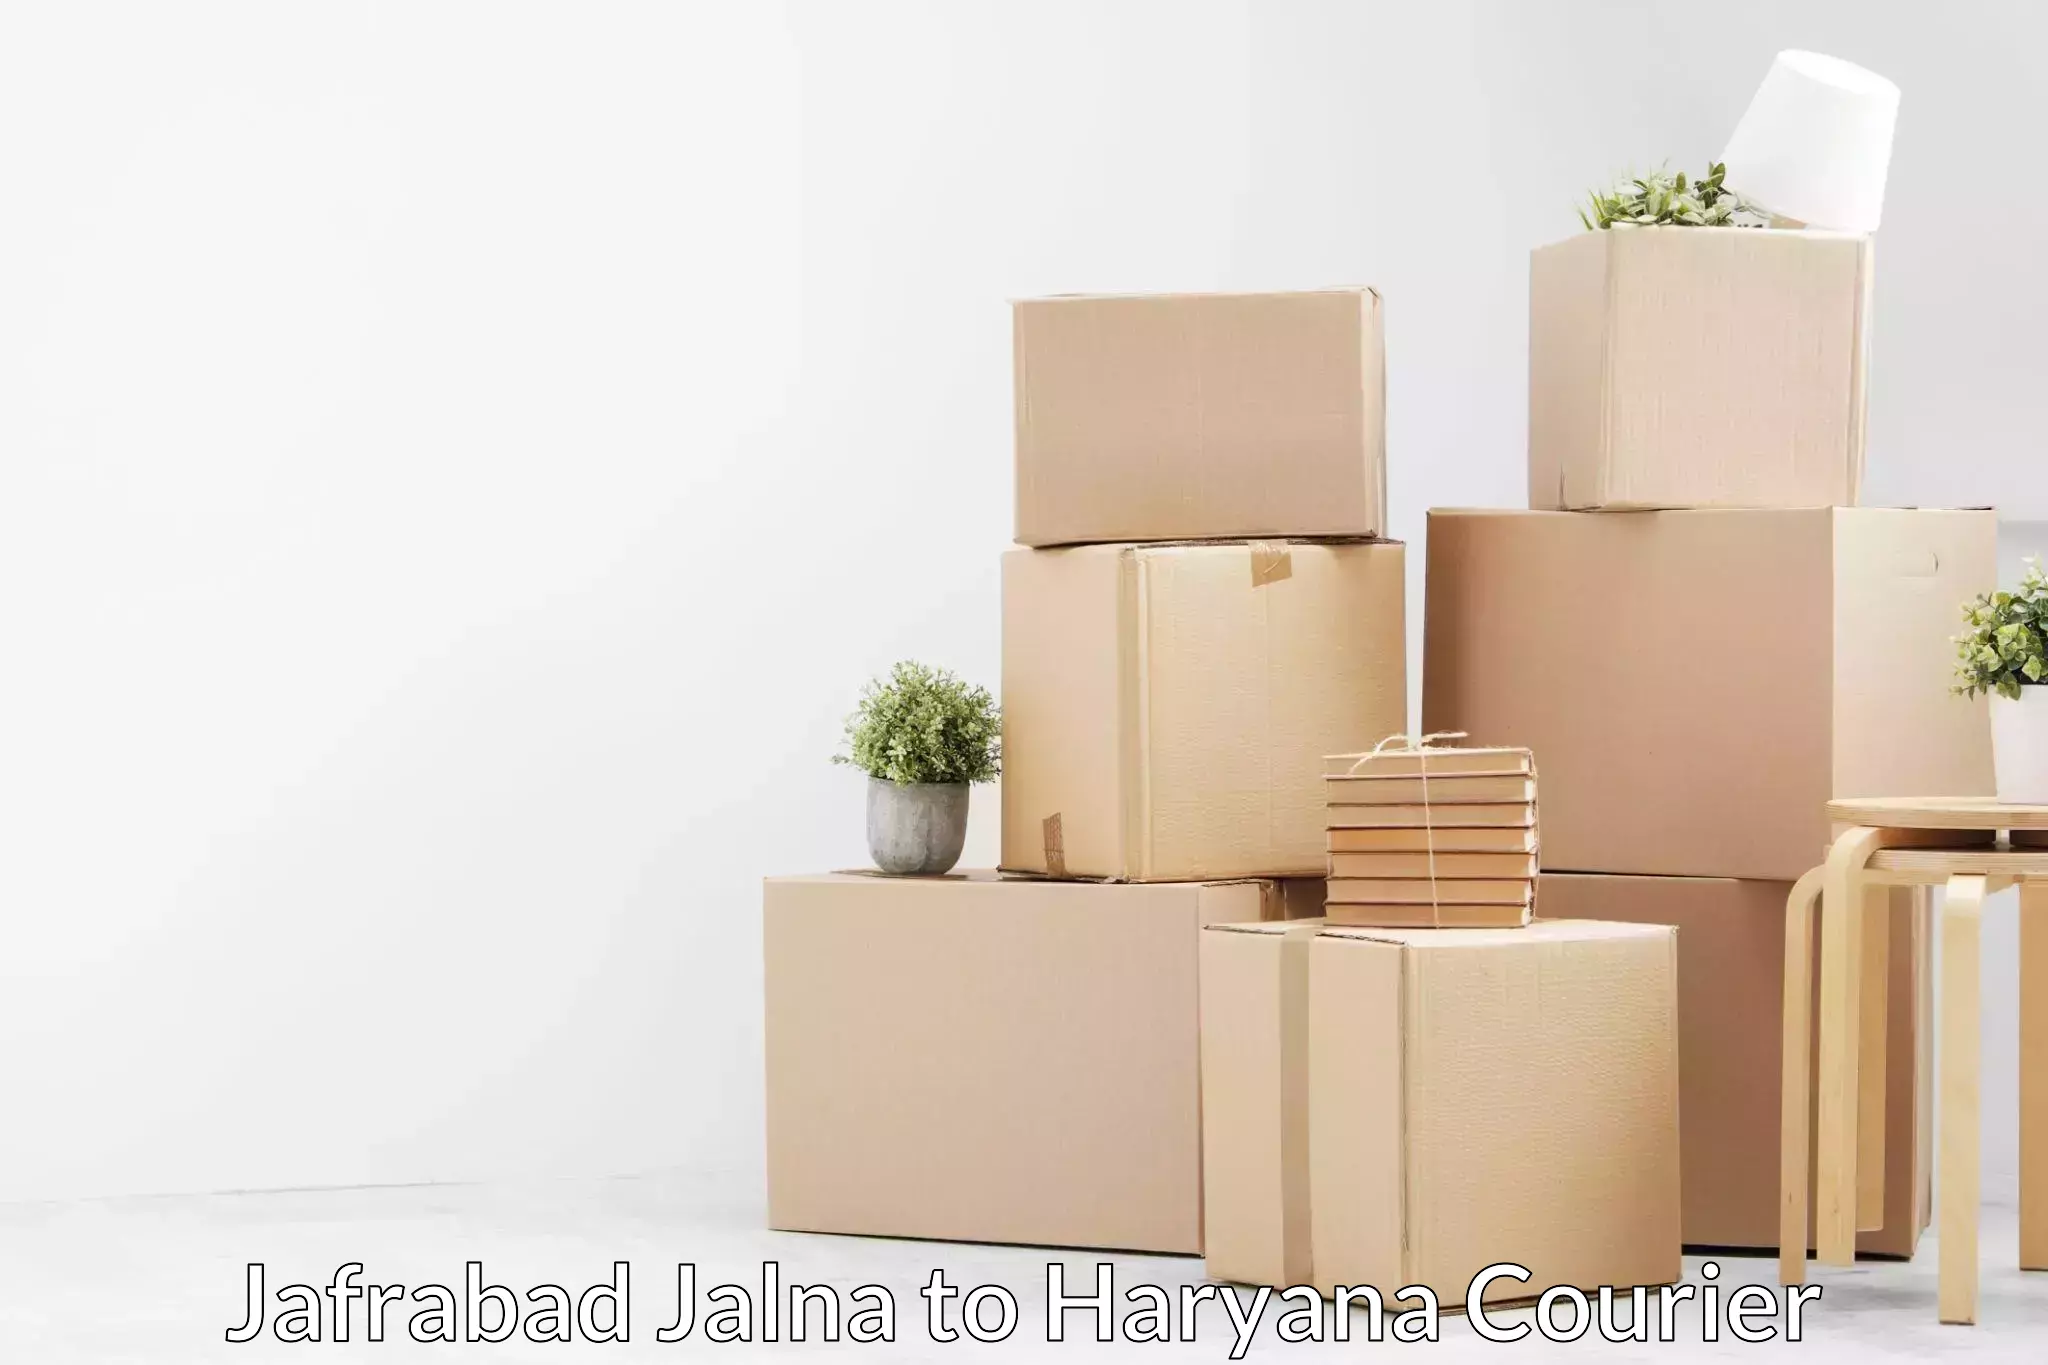 Trusted relocation services Jafrabad Jalna to Haryana